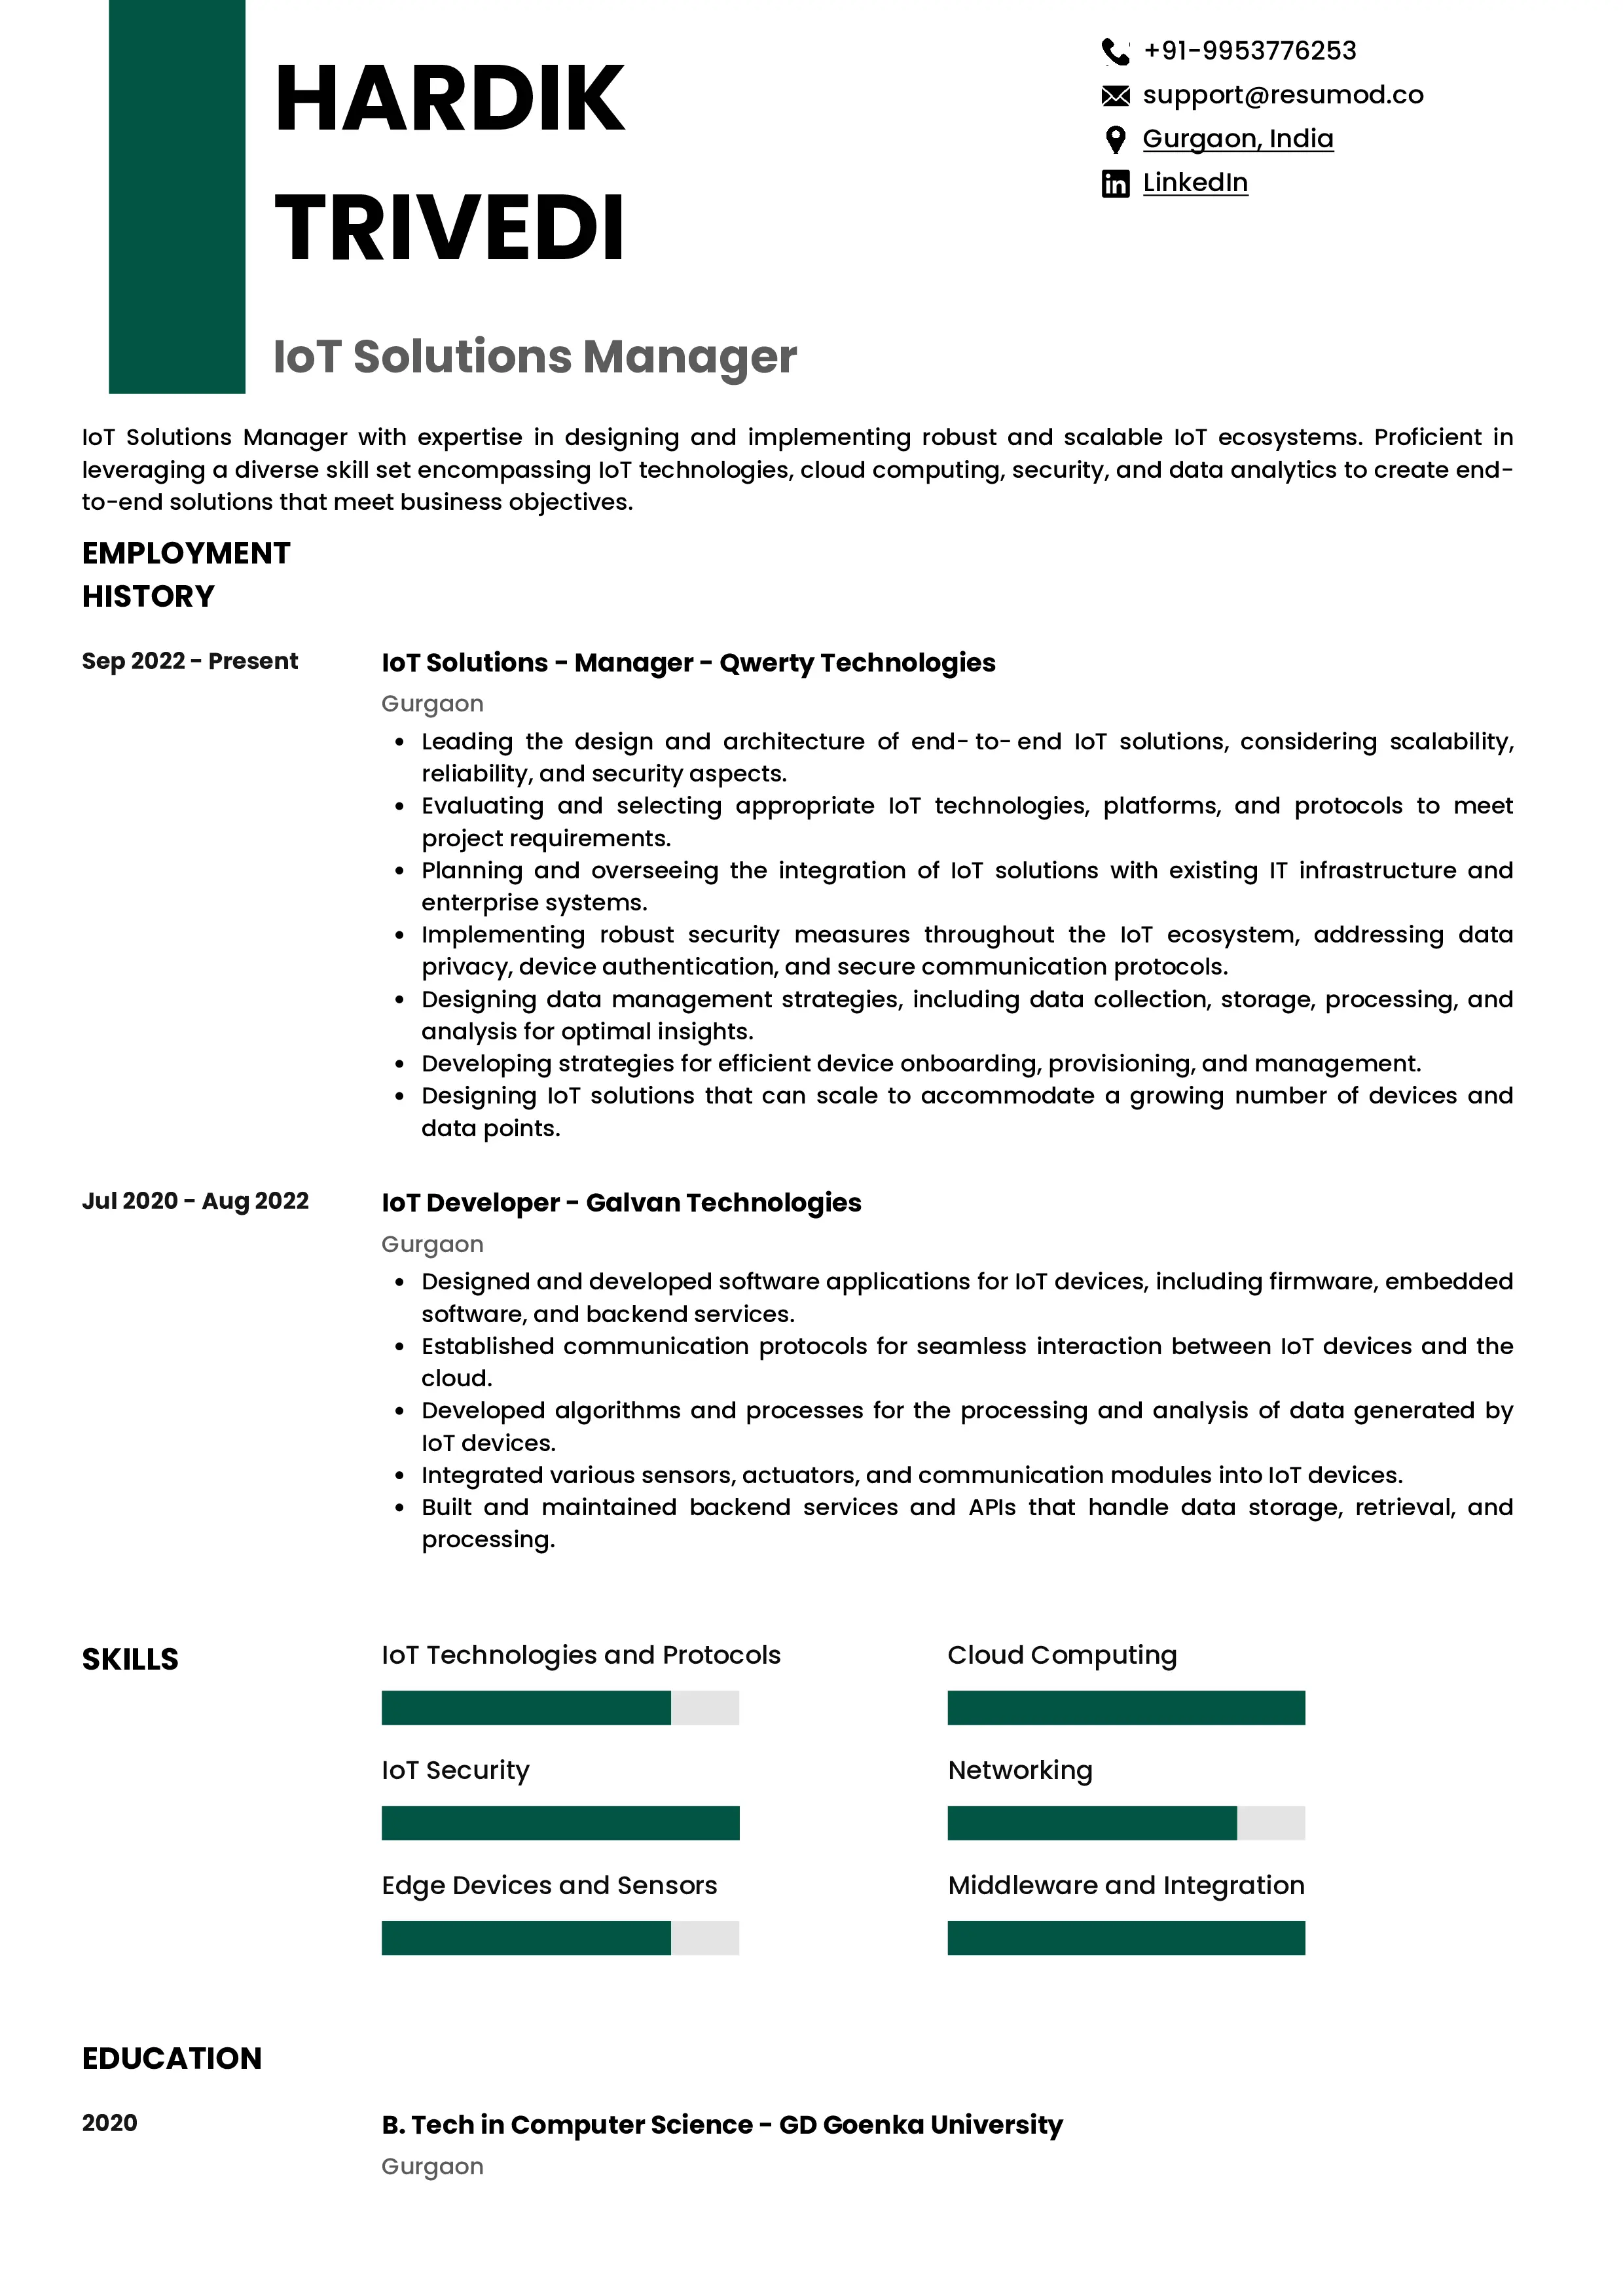 Sample Resume of IoT Solutions Manager | Free Resume Templates & Samples on Resumod.co